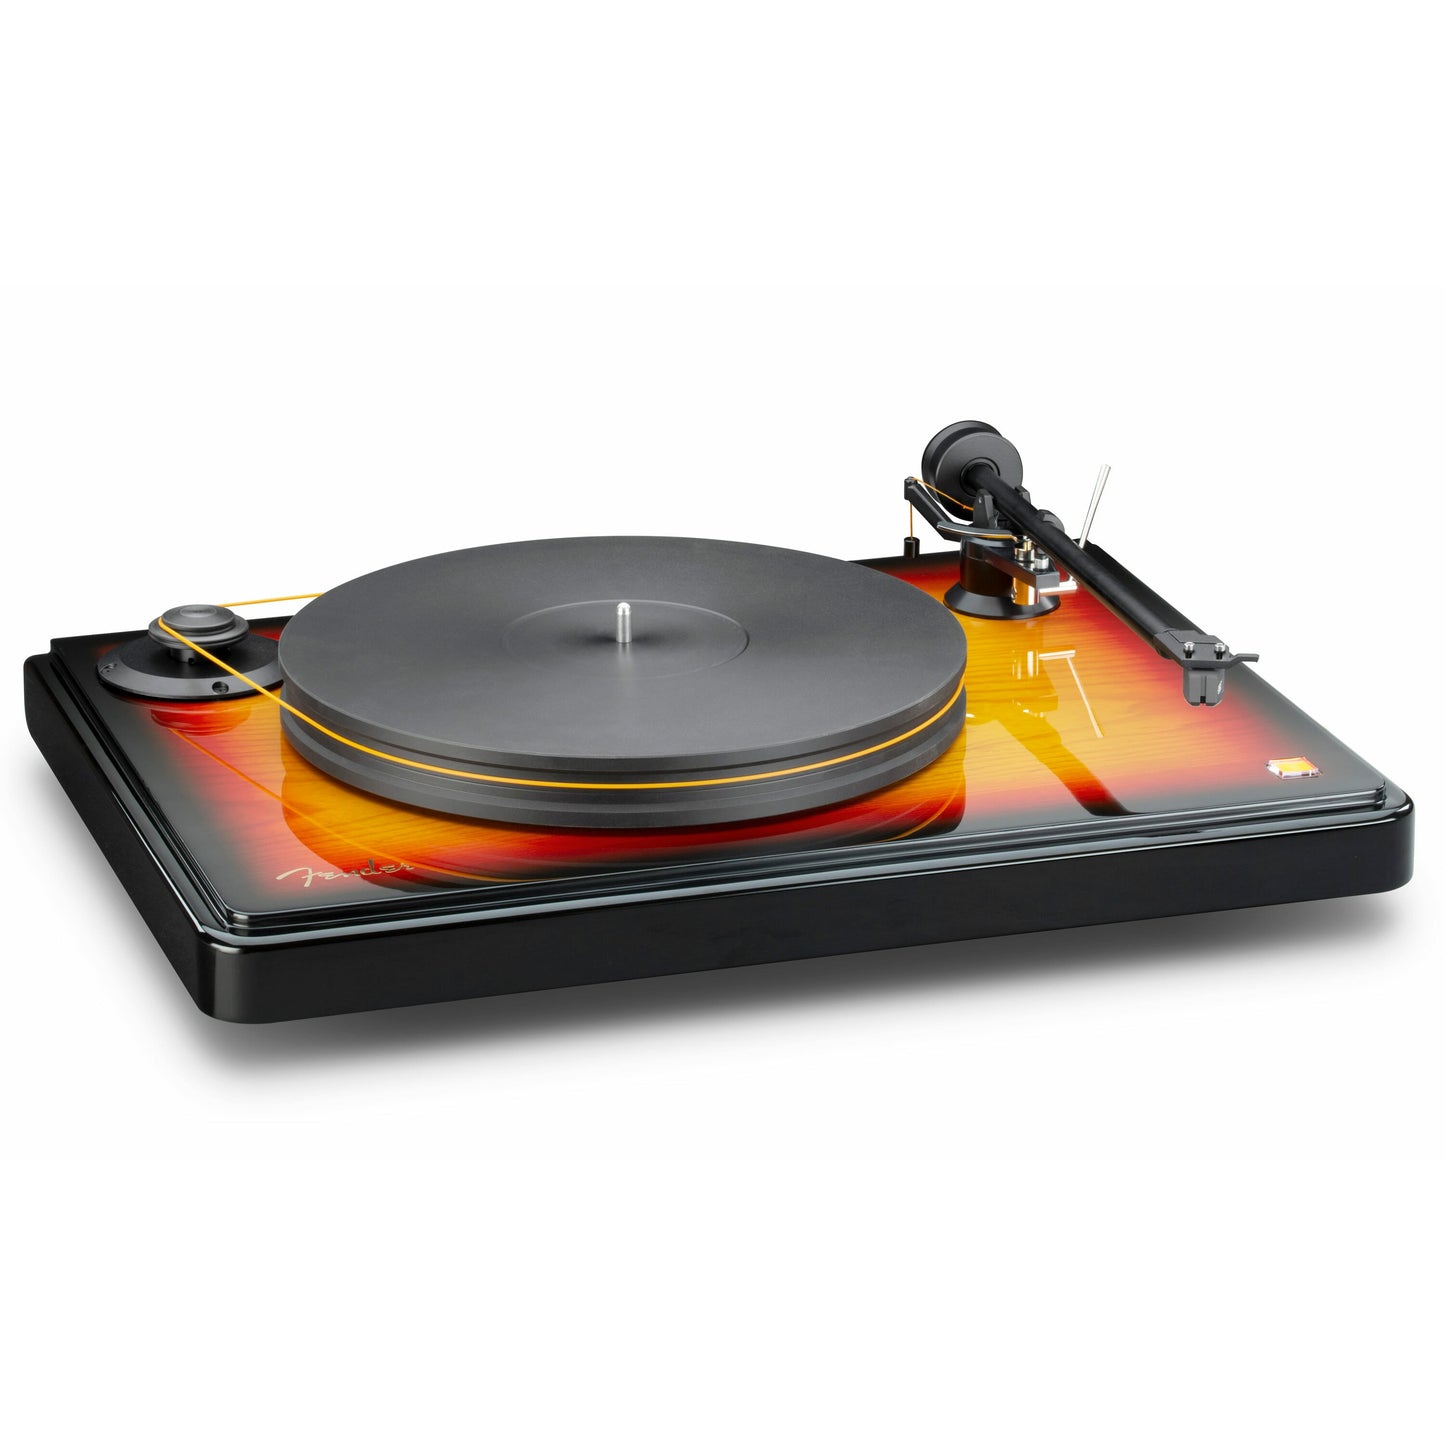 Mobile Fidelity - Fender x PrecisionDeck Limited Edition Turntable